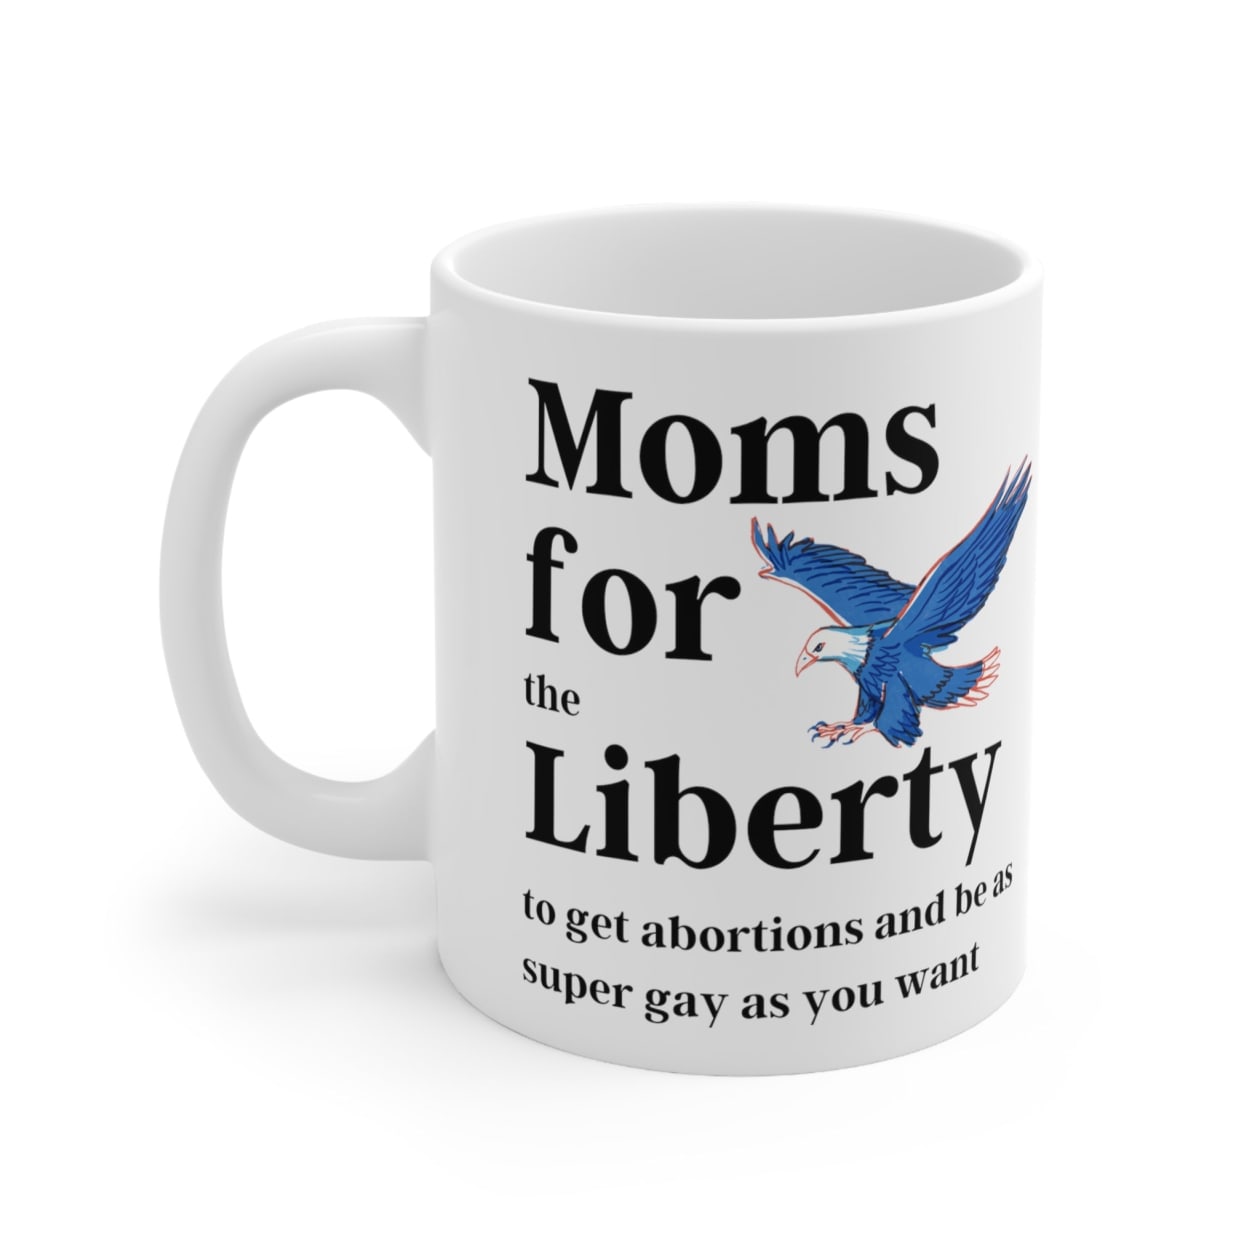 [SATIRE] Moms for (the) Liberty (to get abortions and be as super gay as you want) Ceramic Mug 11oz - Size: 11oz